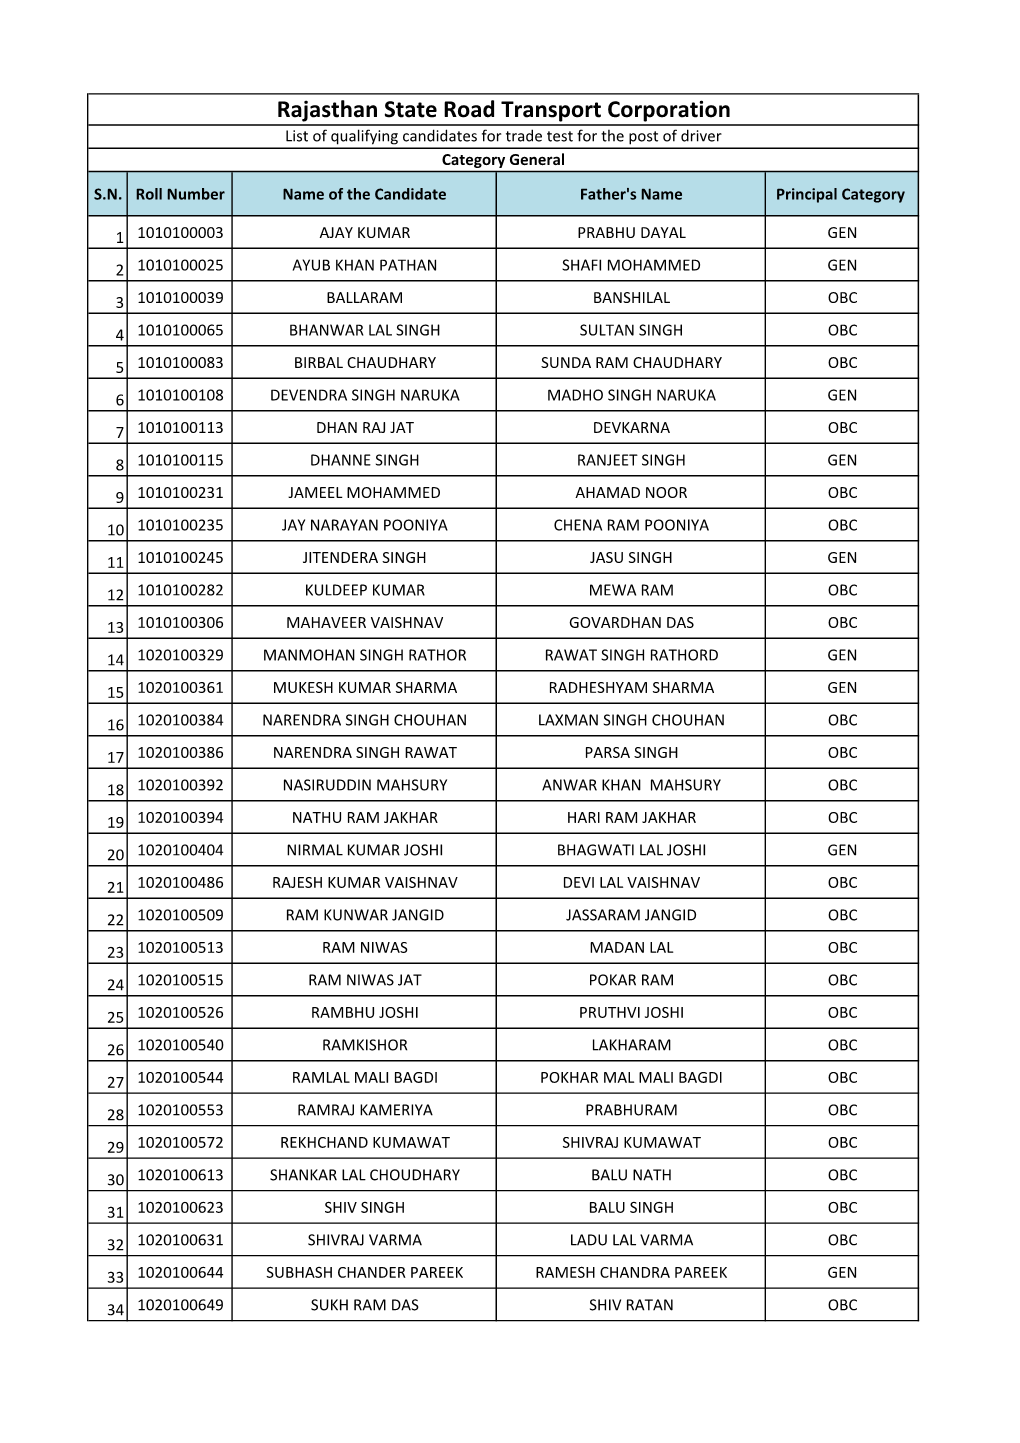 Rajasthan State Road Transport Corporation List of Qualifying Candidates for Trade Test for the Post of Driver Category General